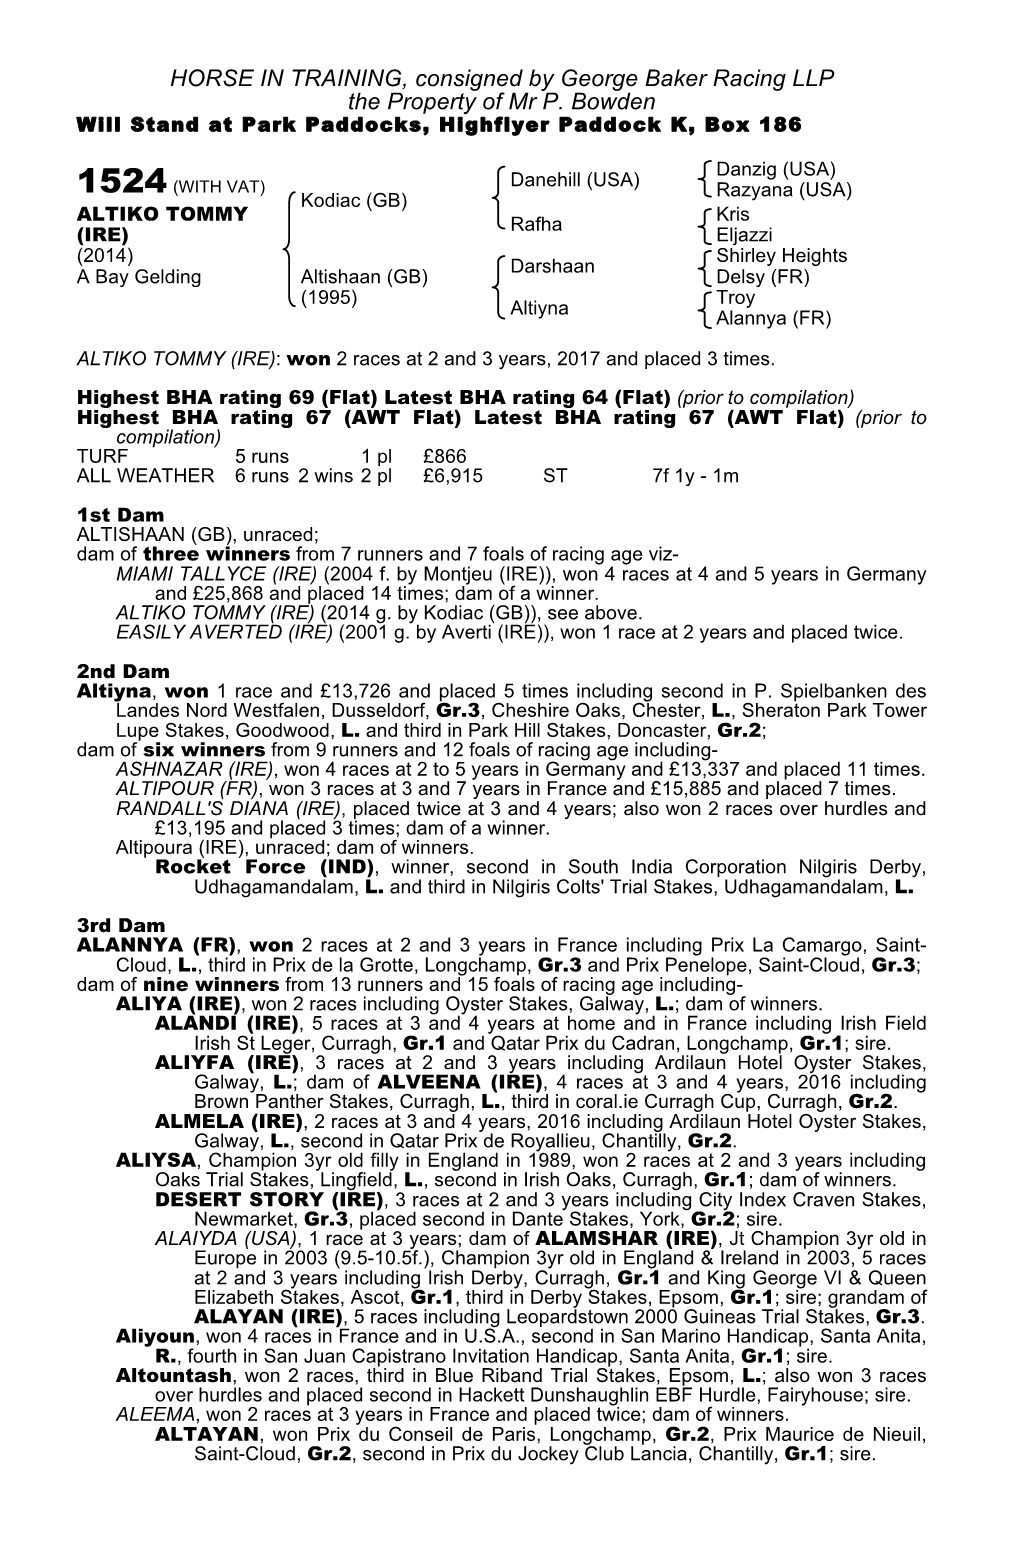 HORSE in TRAINING, Consigned by George Baker Racing LLP the Property of Mr P